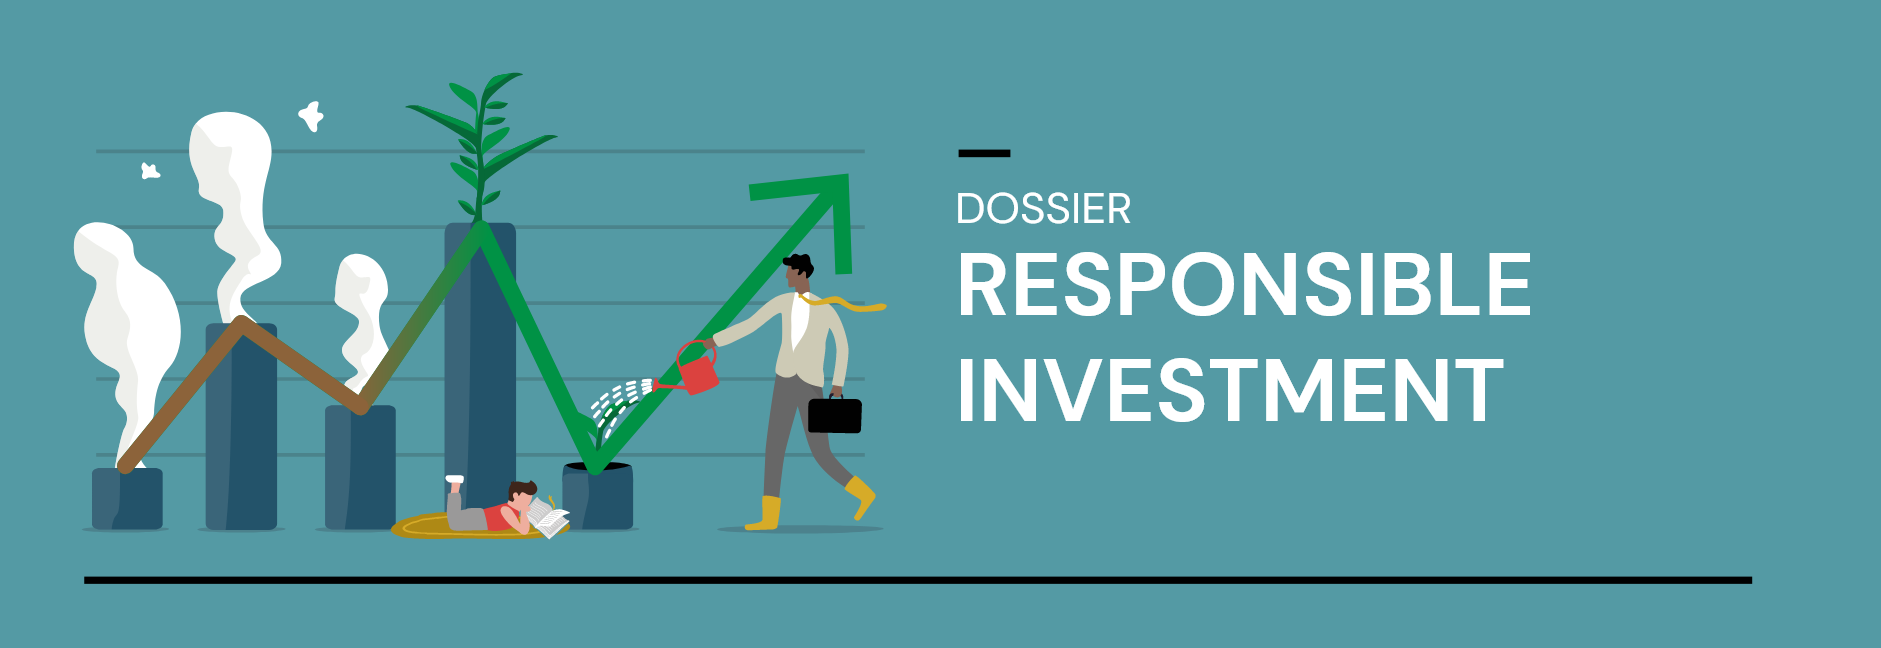 Dossier responsible investment